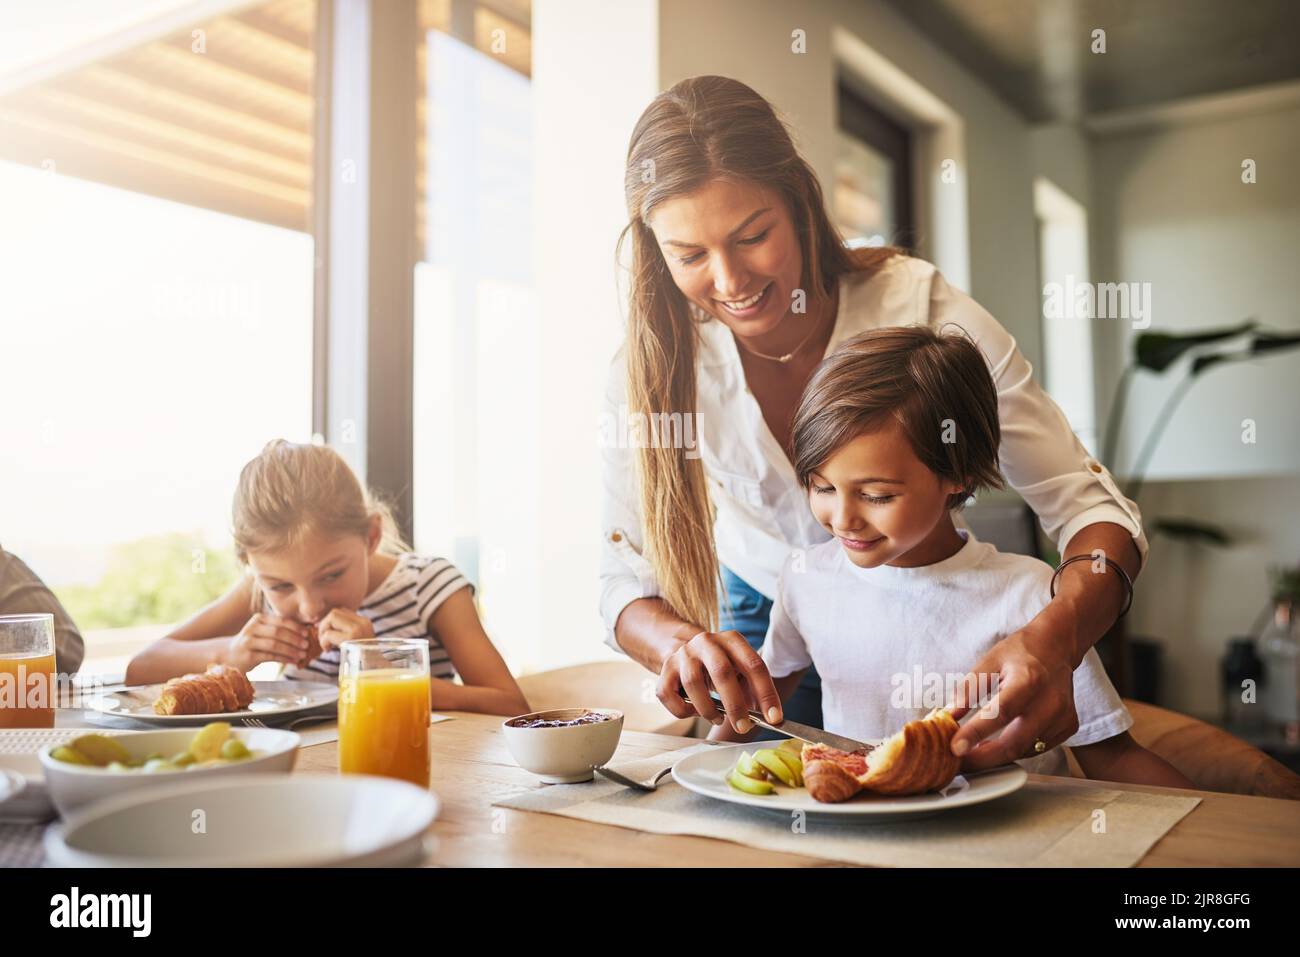 Getting the day going with a good breakfast. a mother having breakfast with her children at home. Stock Photo